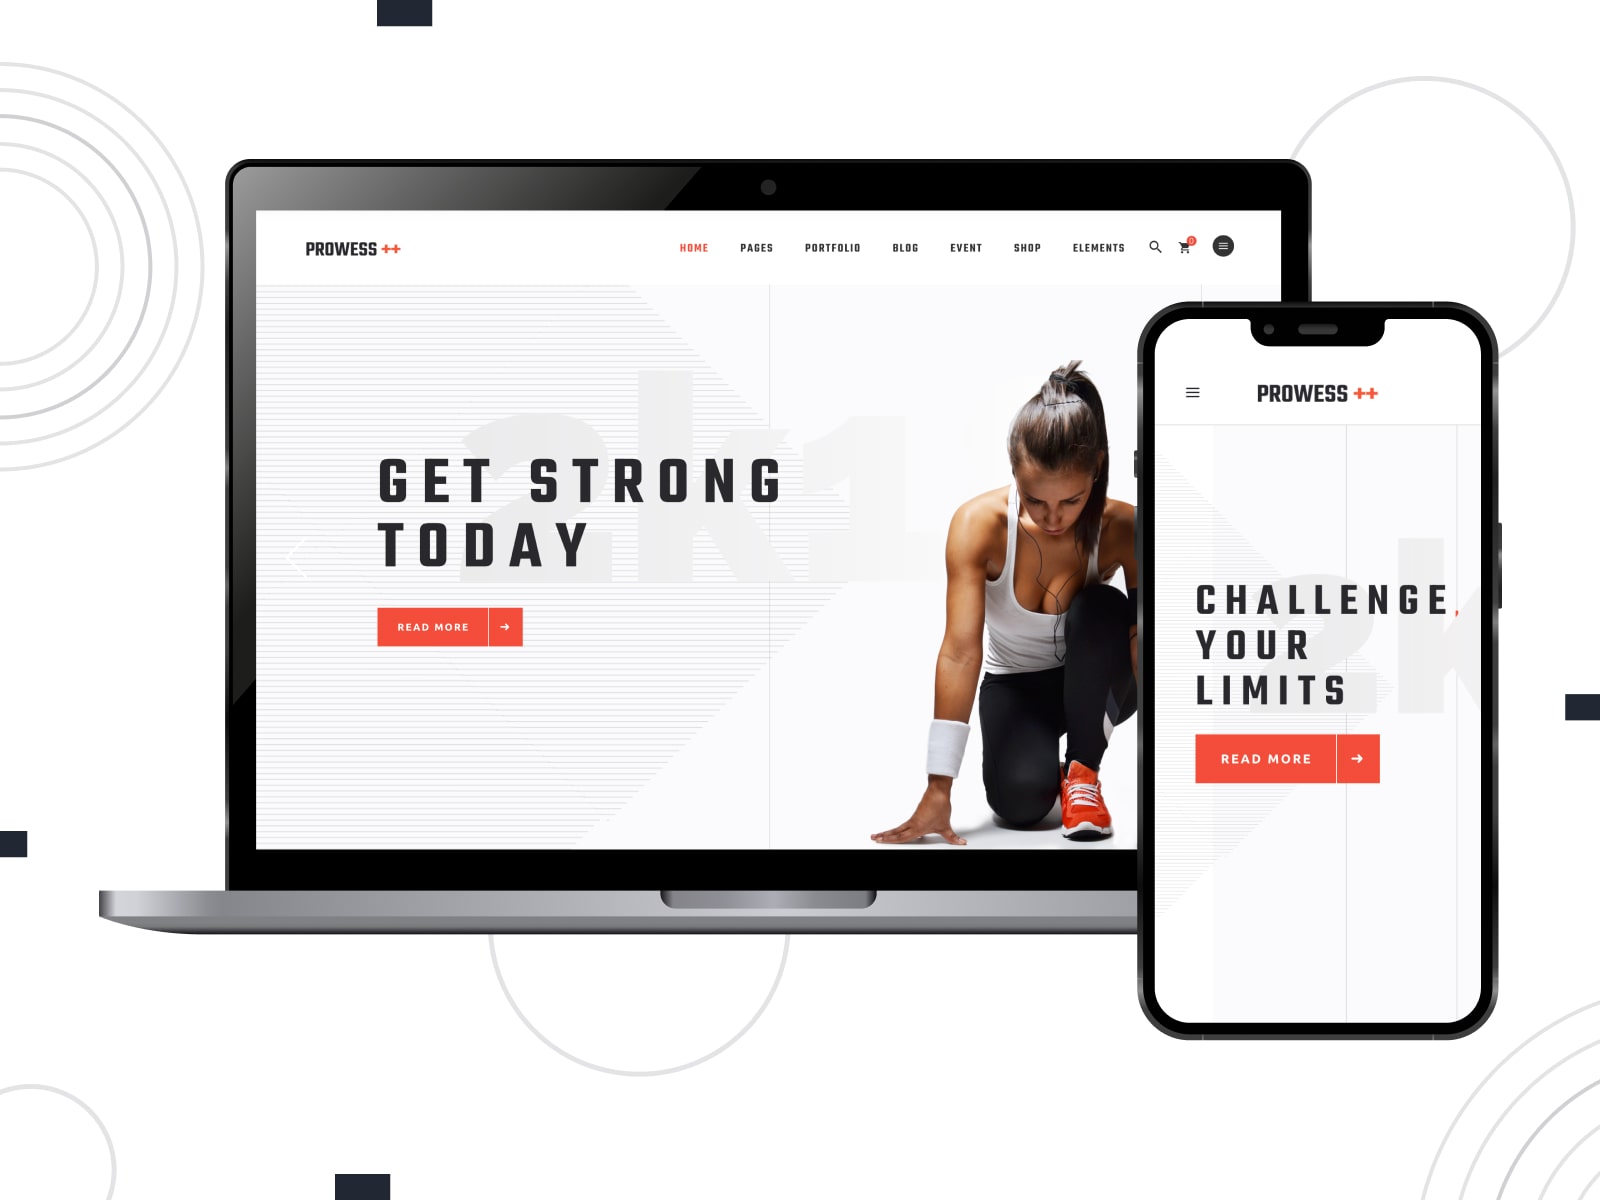 Collage of the Prowess fitness and gym WordPress theme demo page on mobile and desktop screens.